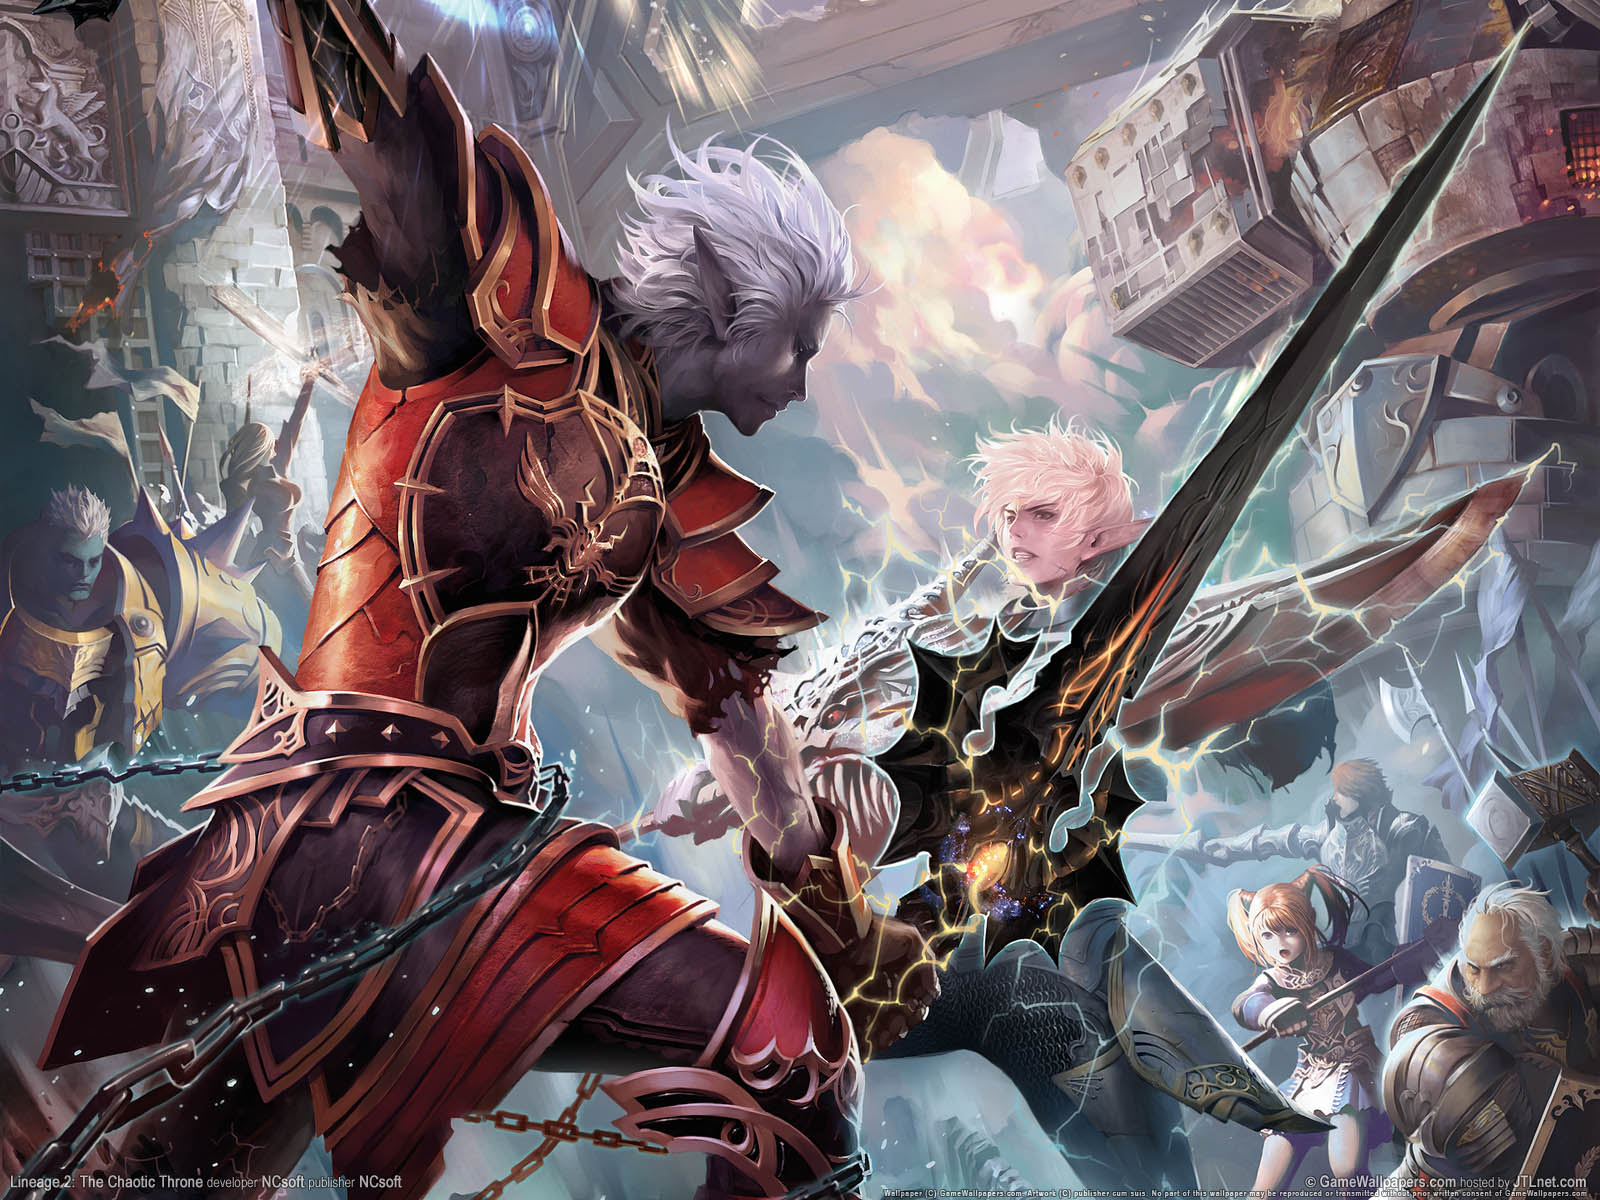 Download HQ Lineage 2 The Chaotic Throne wallpaper / Games / 1600x1200